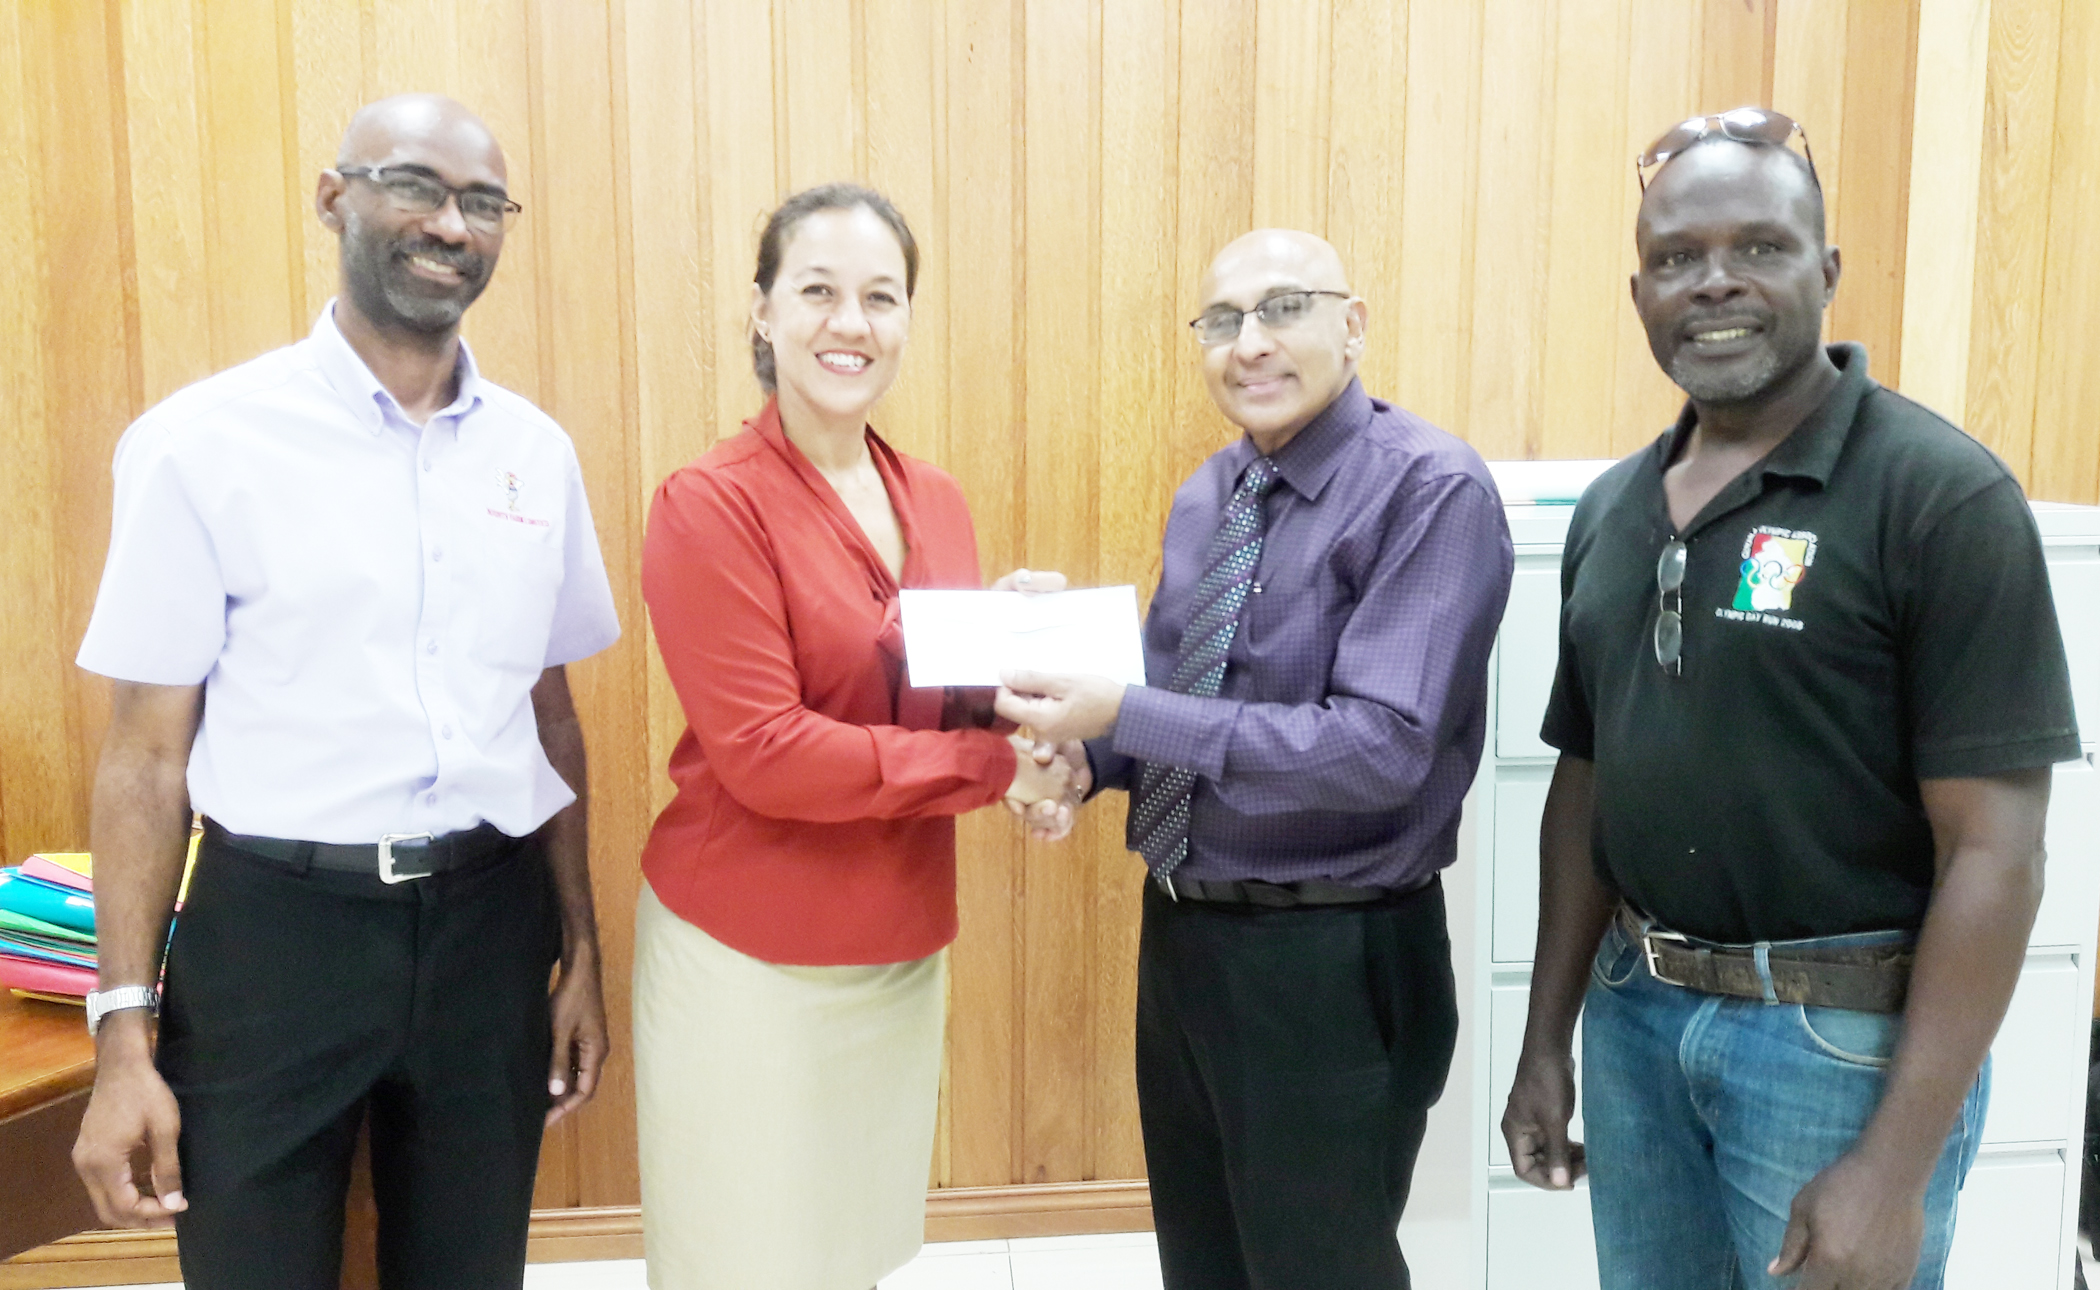 https://www.kaieteurnewsonline.com/images/2017/10/From-left-GOA-executive-Garfield-Wiltshire-GBH-secretary-Tricia-Fiedtkou-receiving-the-cheque-from-head-of-the-GOA-K.A.-Juman-Yassin-who-is-flanked-by-Deion-Nurse.jpg